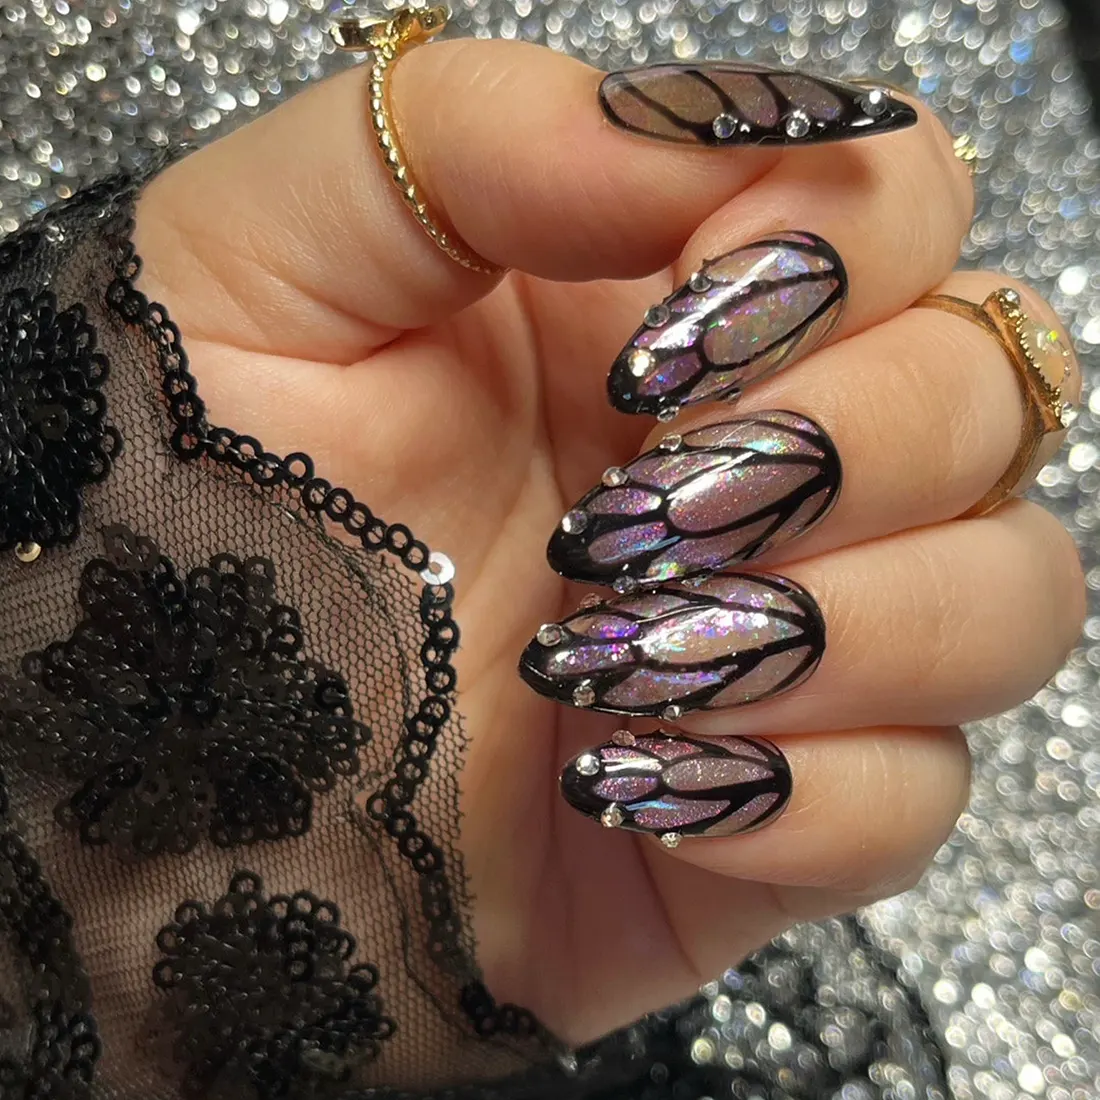 Fairy wing manicure with iridescent glitter polish and nail jewels | 9 Witchy Nail Designs You Can Buy as Press-Ons on Etsy | Slashed Beauty